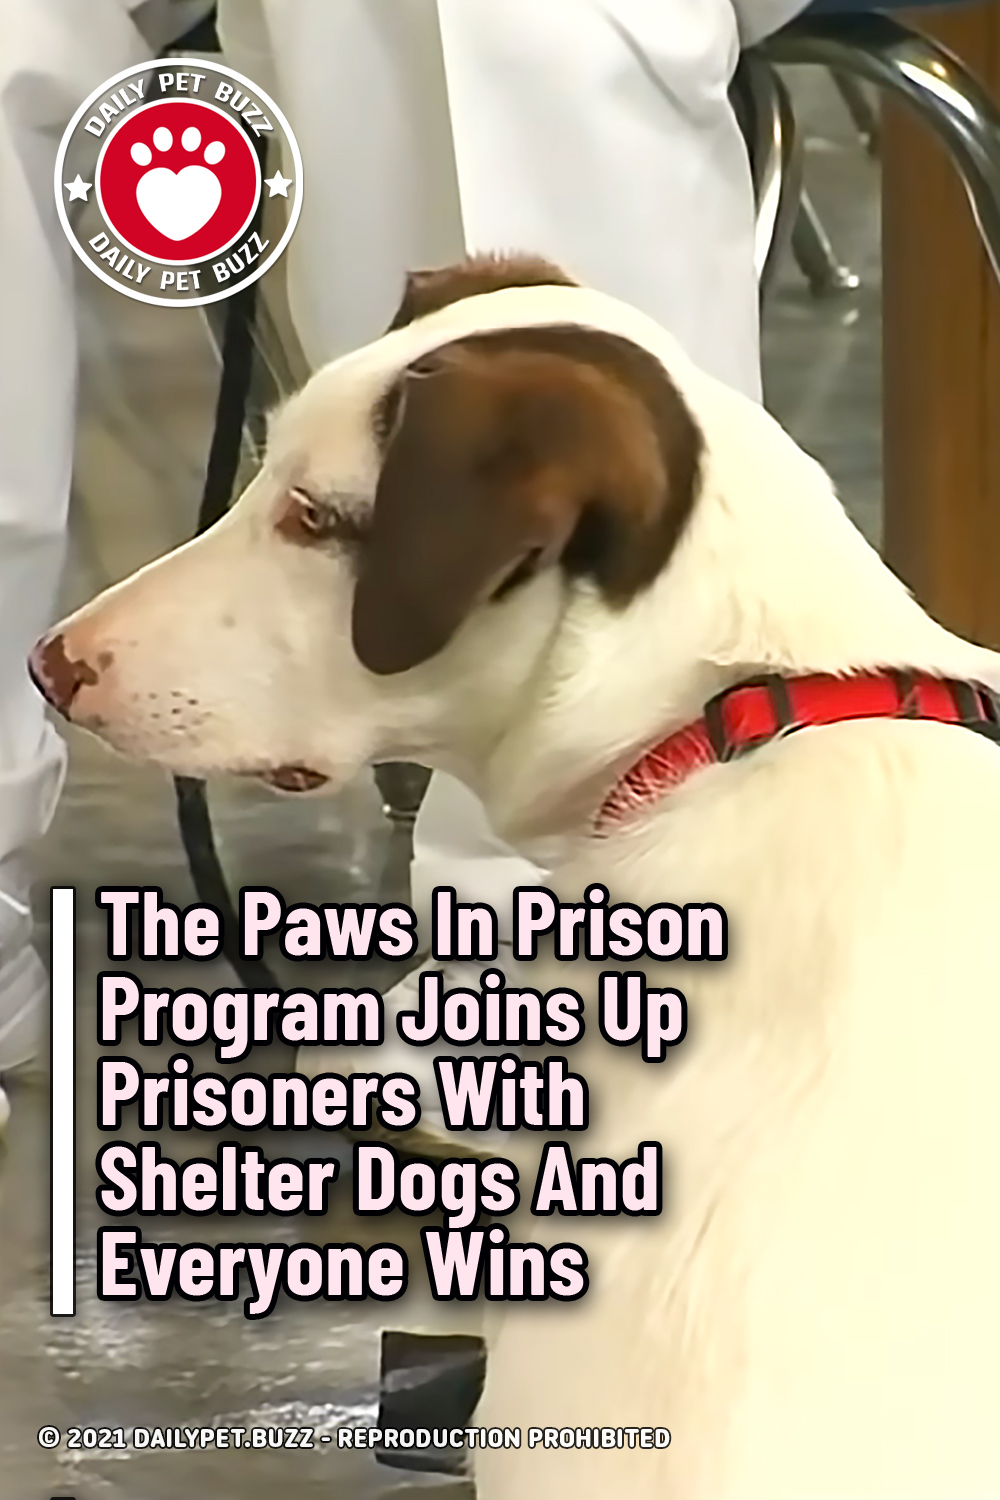 The Paws In Prison Program Joins Up Prisoners With Shelter Dogs And Everyone Wins